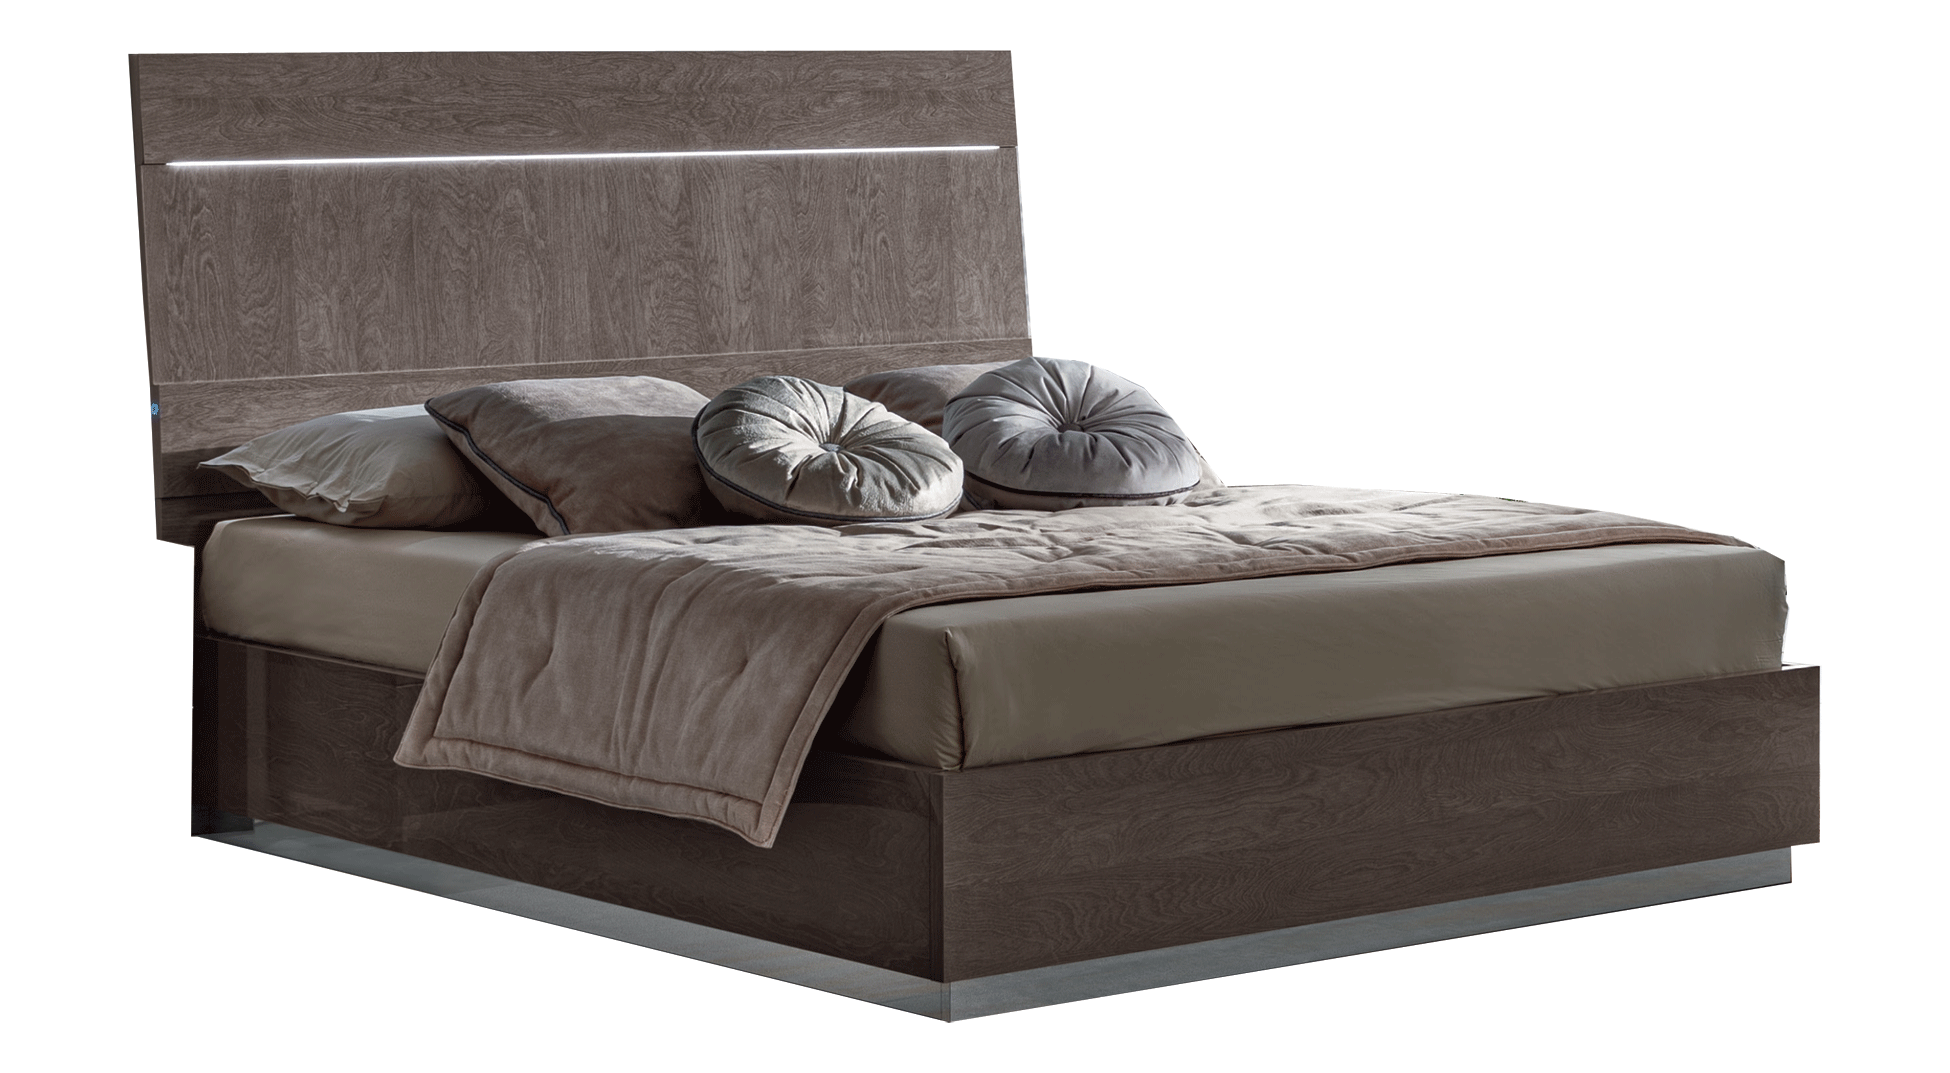 Bedroom Furniture Dressers and Chests Kroma SILVER Bed